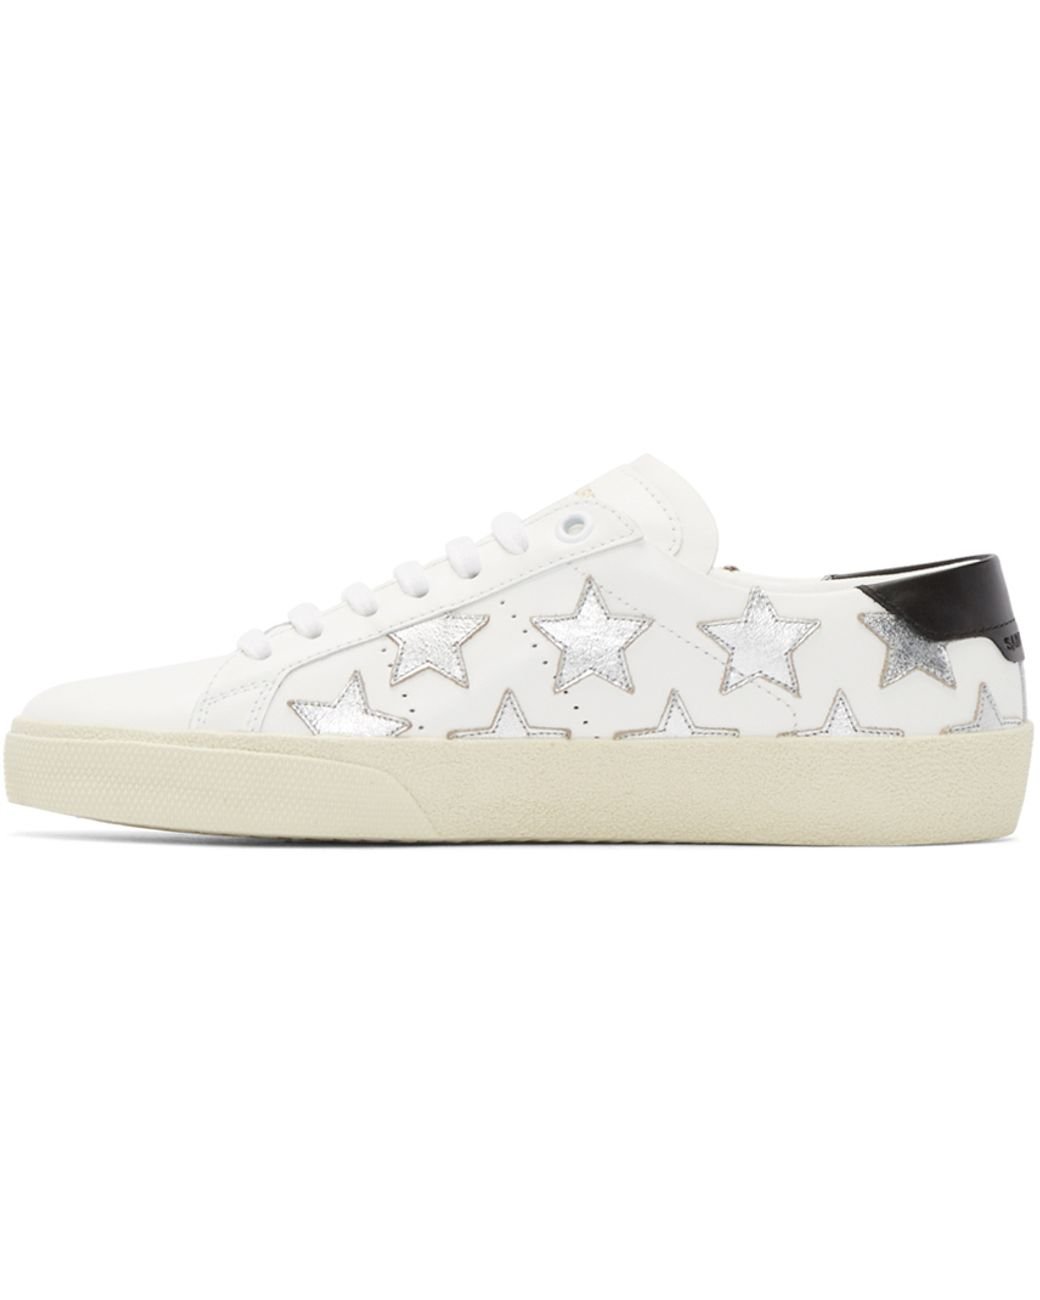 Saint Laurent Stars Embroidered SL06 Sneakers men - Glamood Outlet